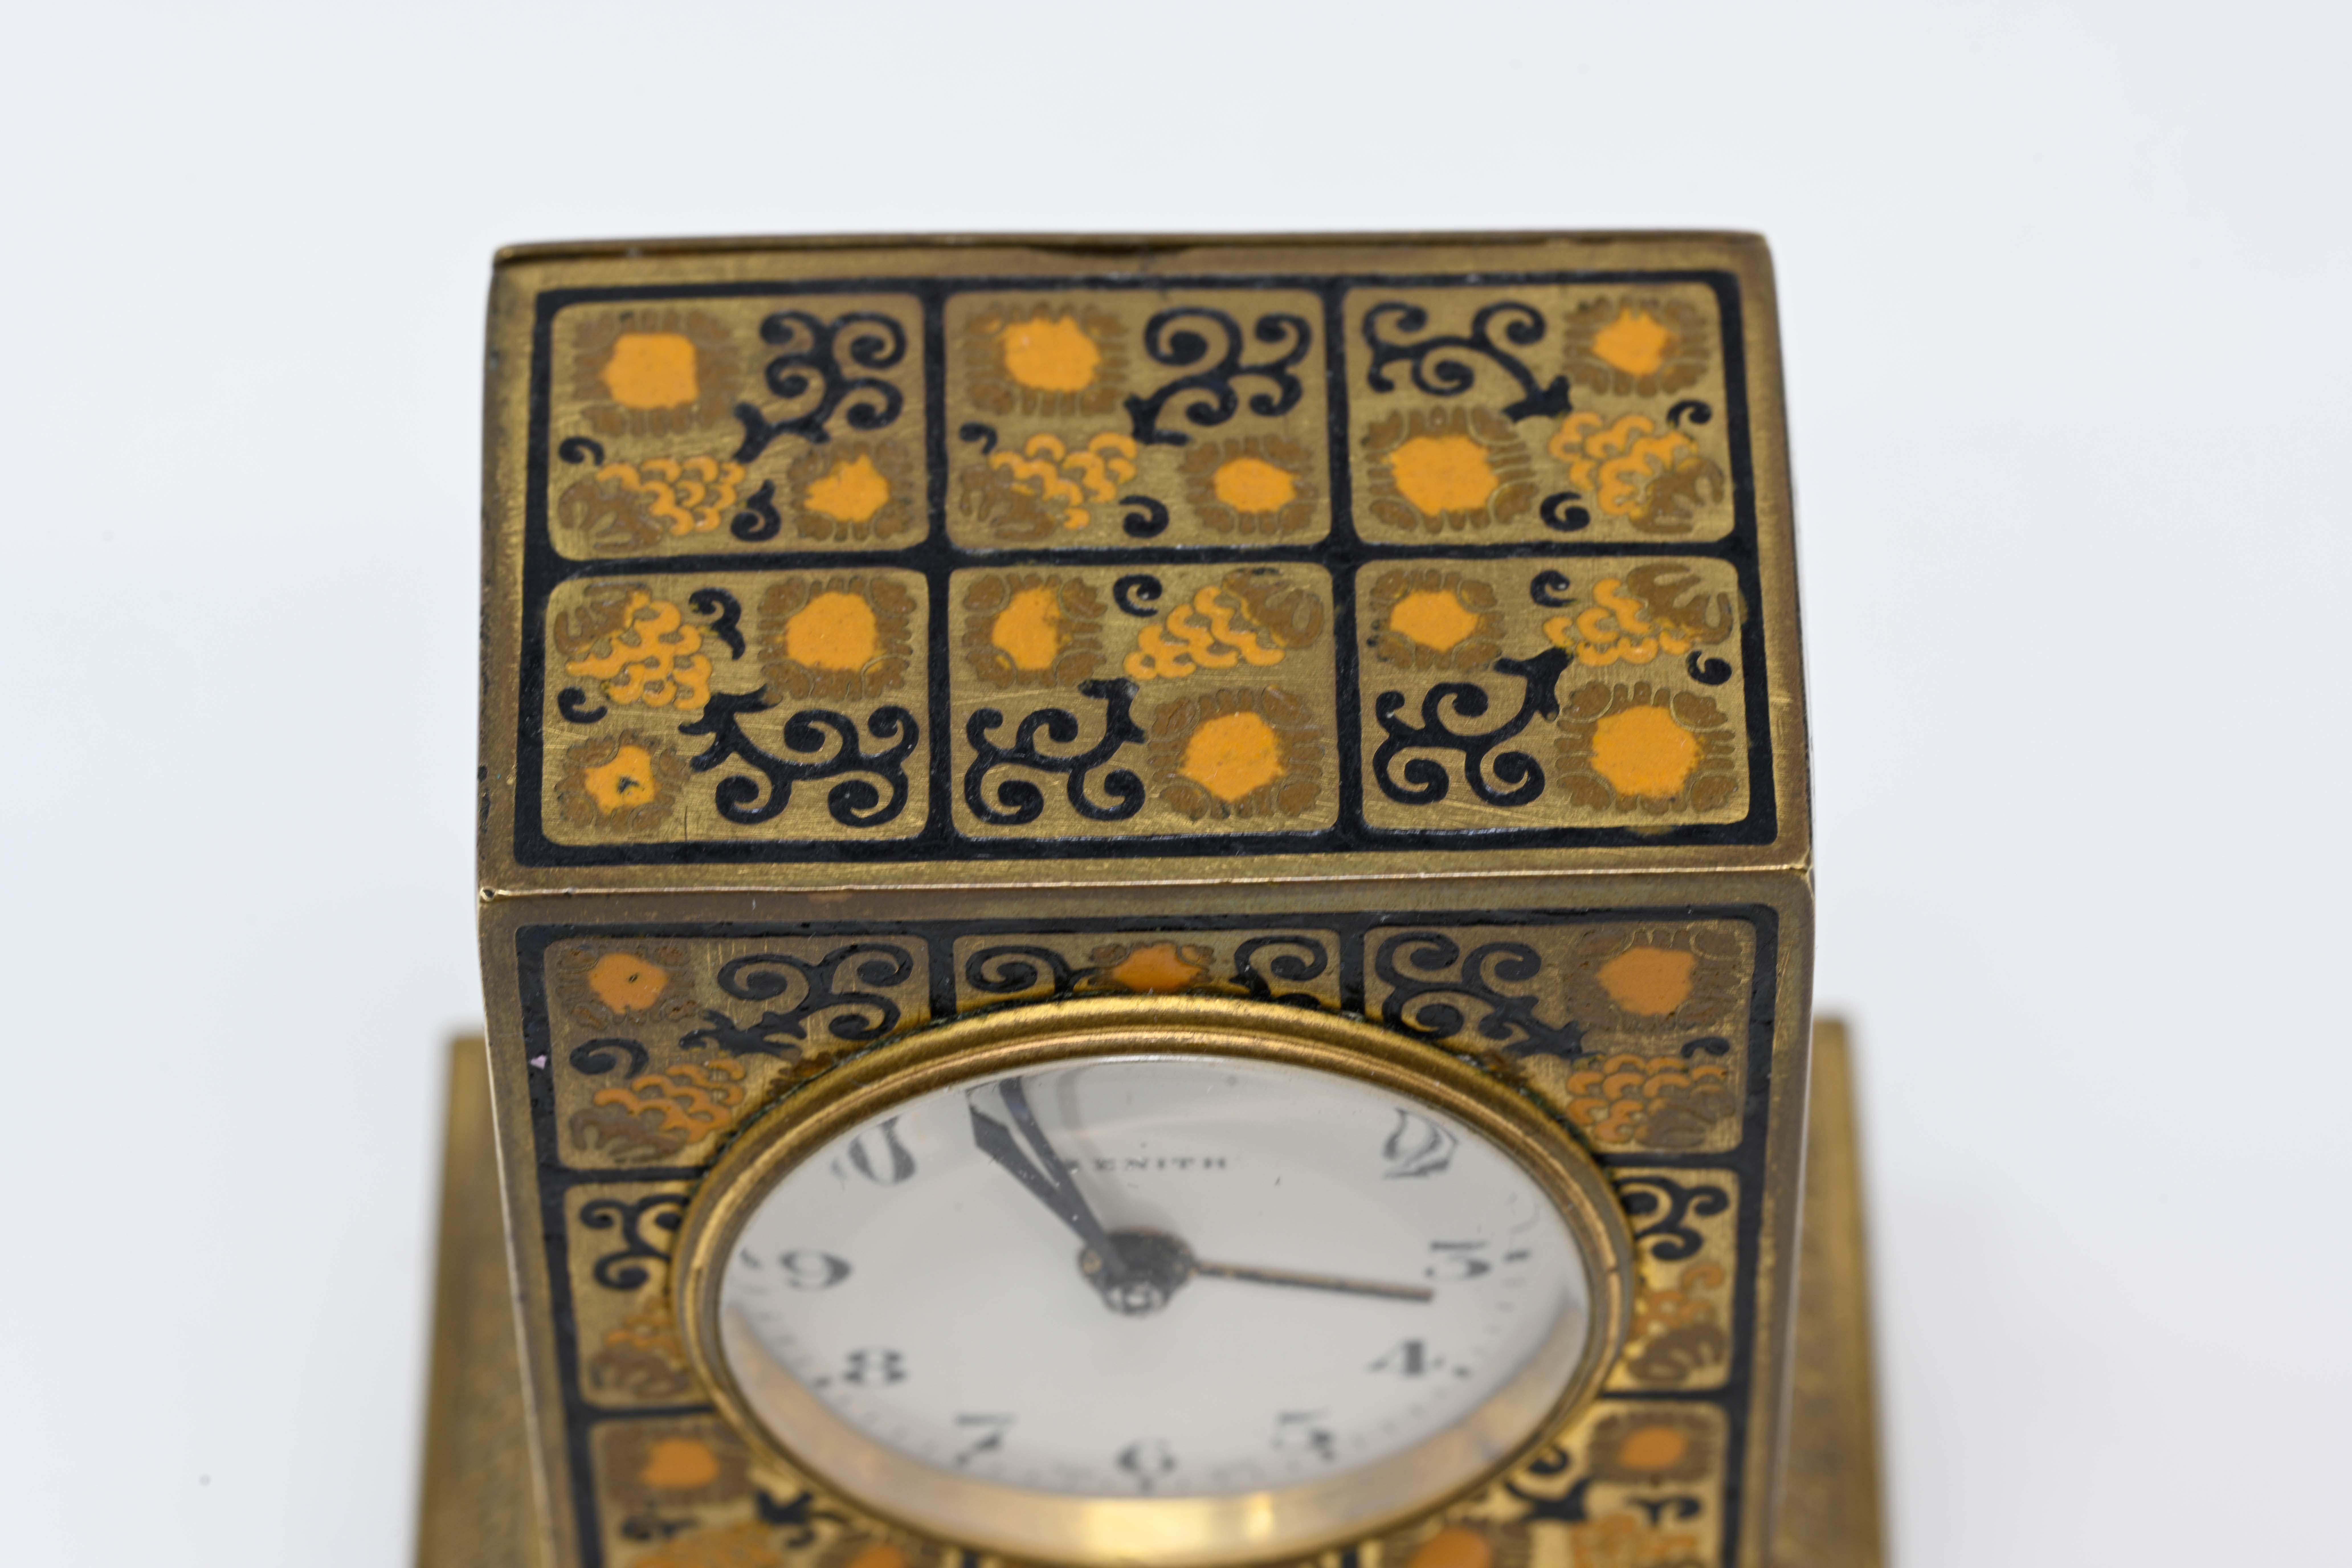 Zenith alarm enameled bronze dore travel clock, Swiss made. Enamel dial, signed and numbered on the base 409. In good working order, no box, stands on 4 feet. Decorated with geometric panels signed on the back. Covered metal Dore #6243, measures 2